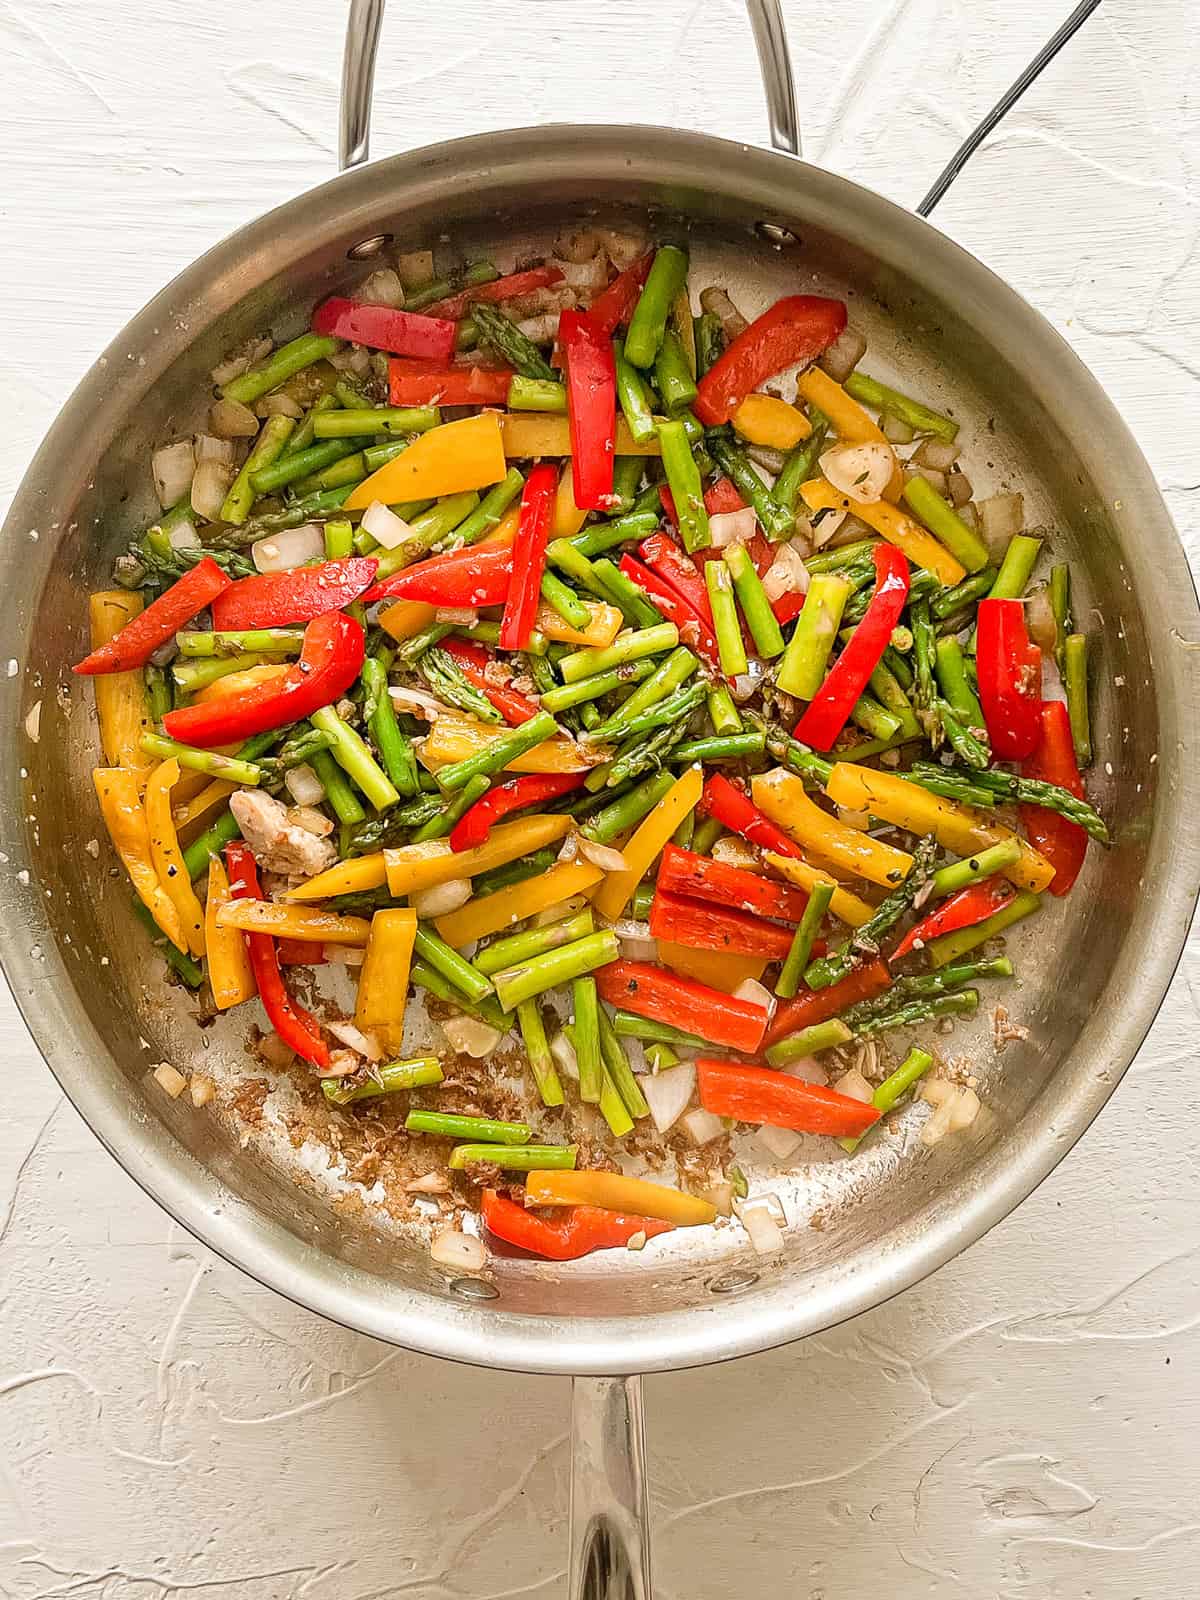 Onions, asparagus, red & yellow bell peppers sauteing in a stainless steel skillet.